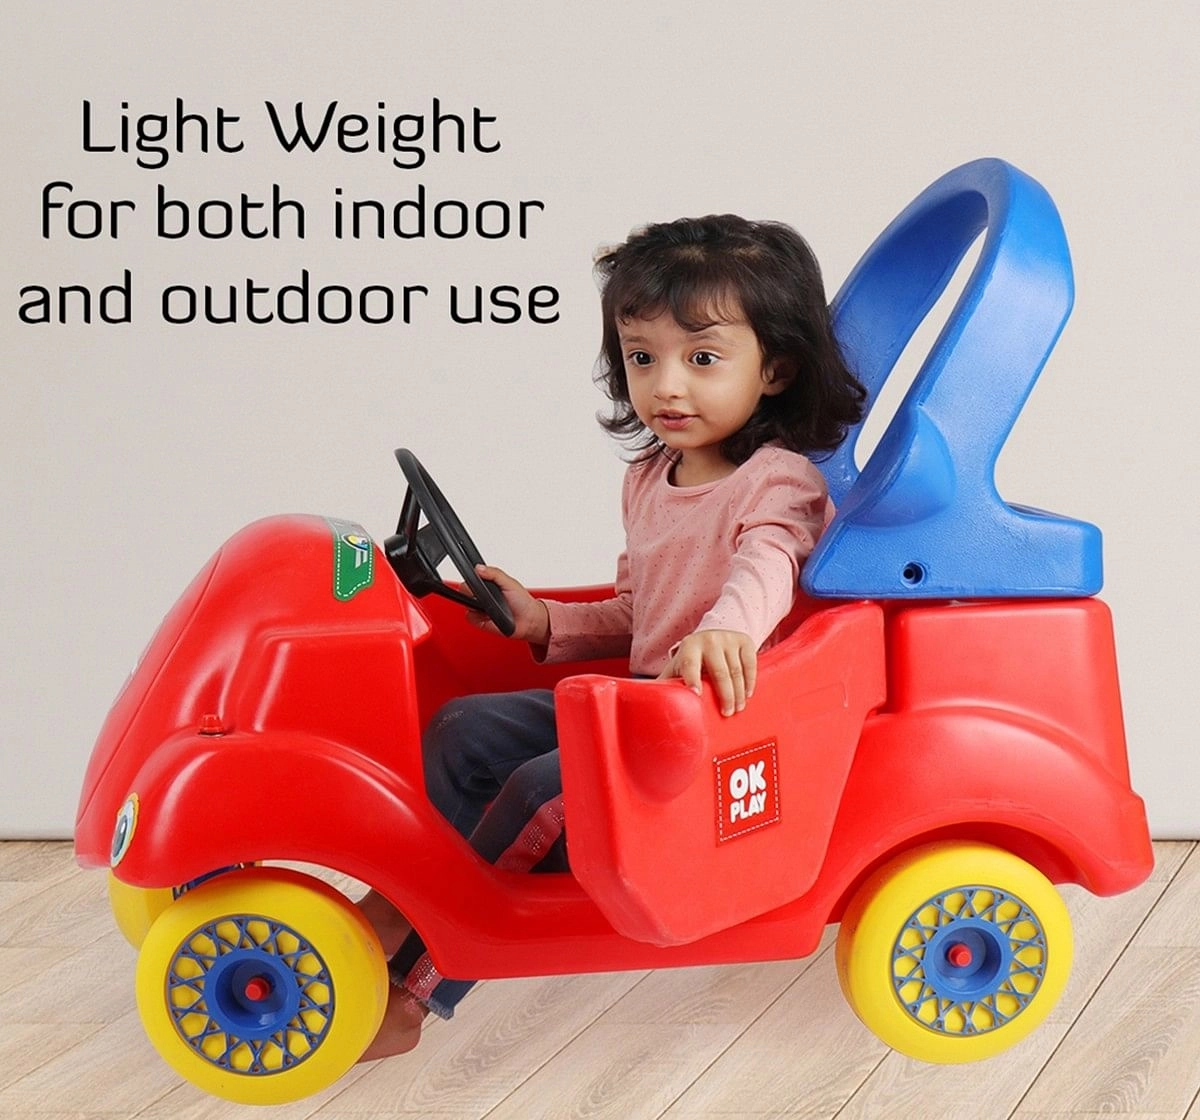 Ok Play Coupe Small Car for Kids 1Y+, Multicolour